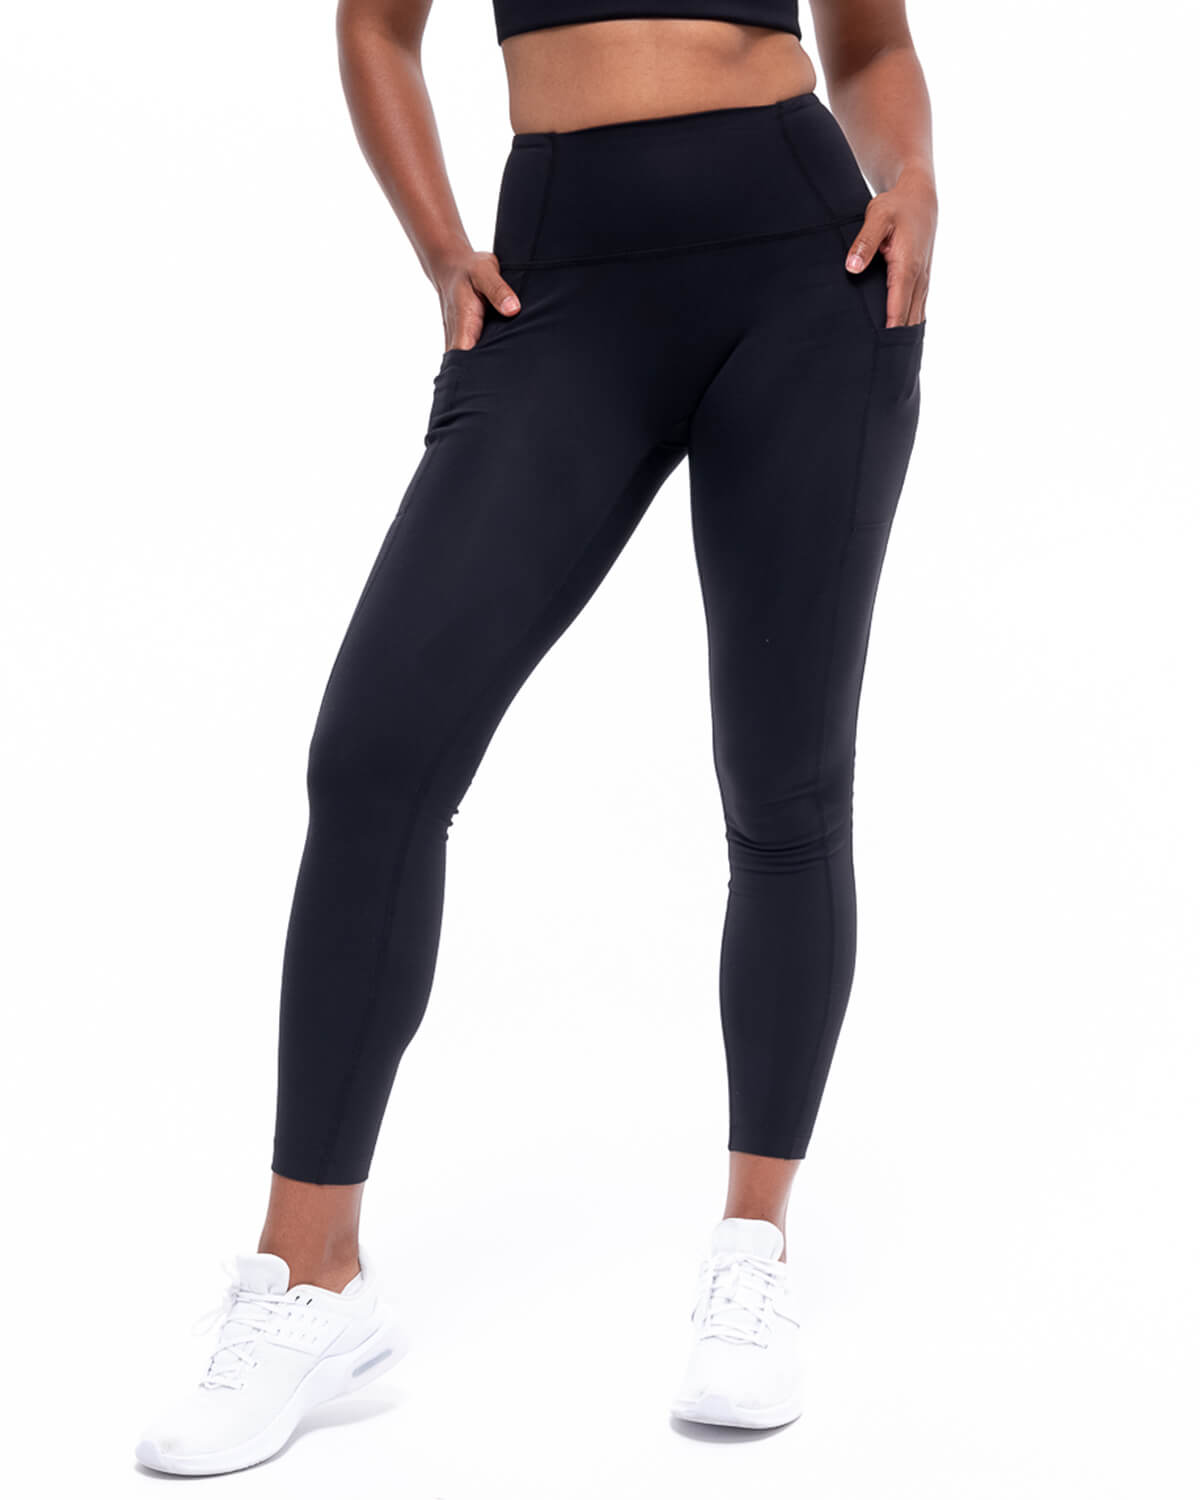 Buy ALONG FIT Women's Mesh Yoga Leggings with Side Pockets Tummy Control  Workout Running Capris High Waist Yoga Pants, Mesh-black, Medium at  Amazon.in